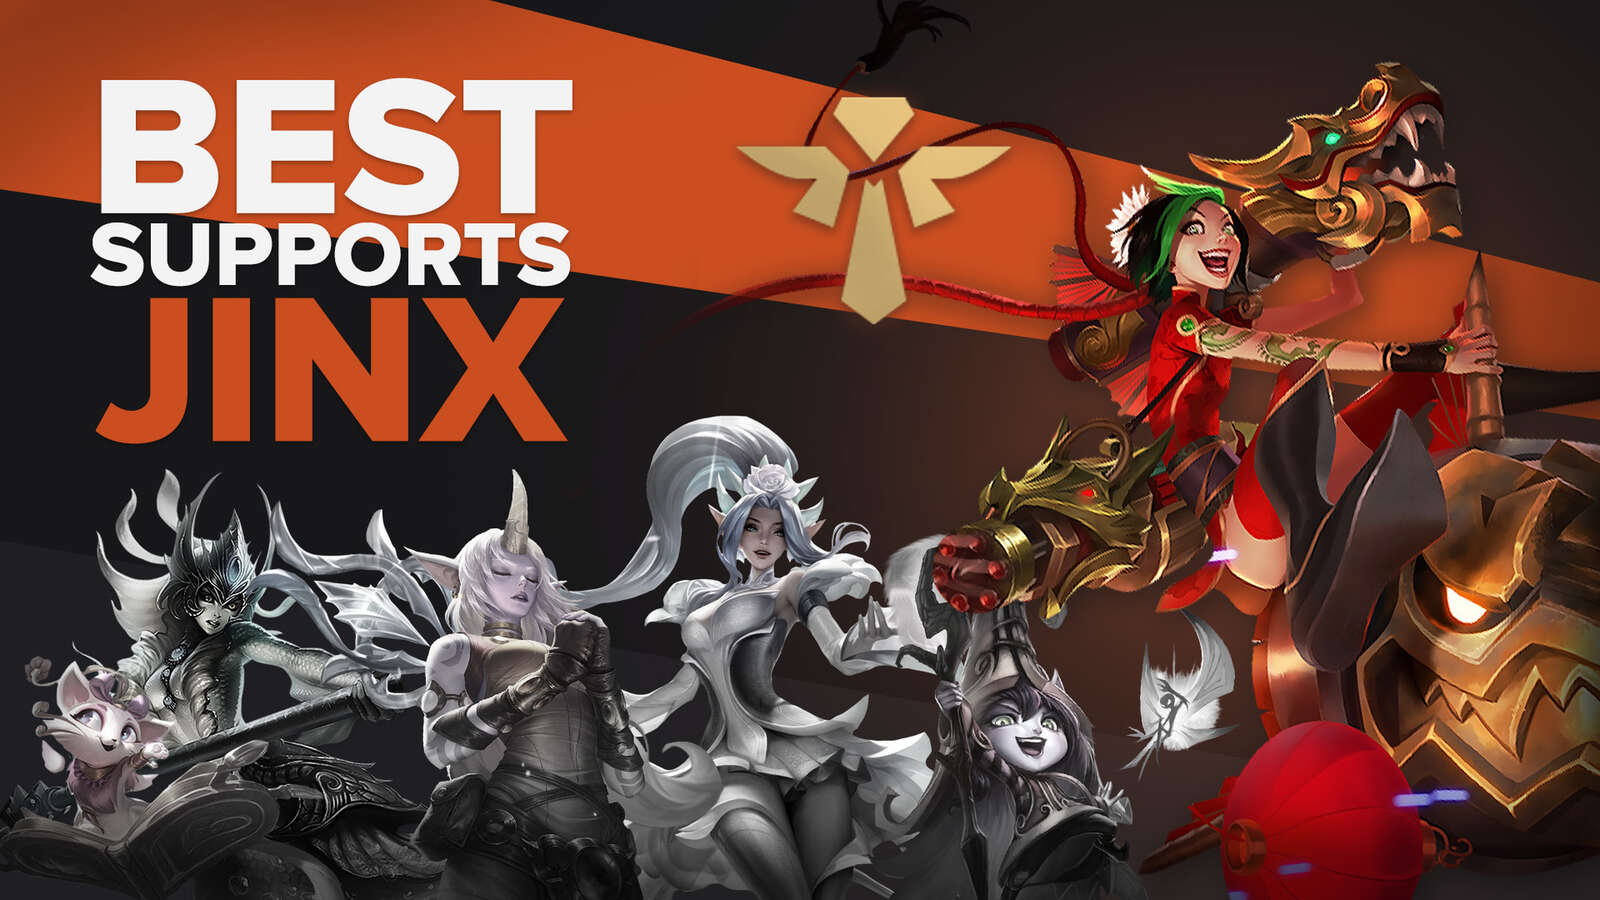 Best League of Legends Supports to Play With Jinx